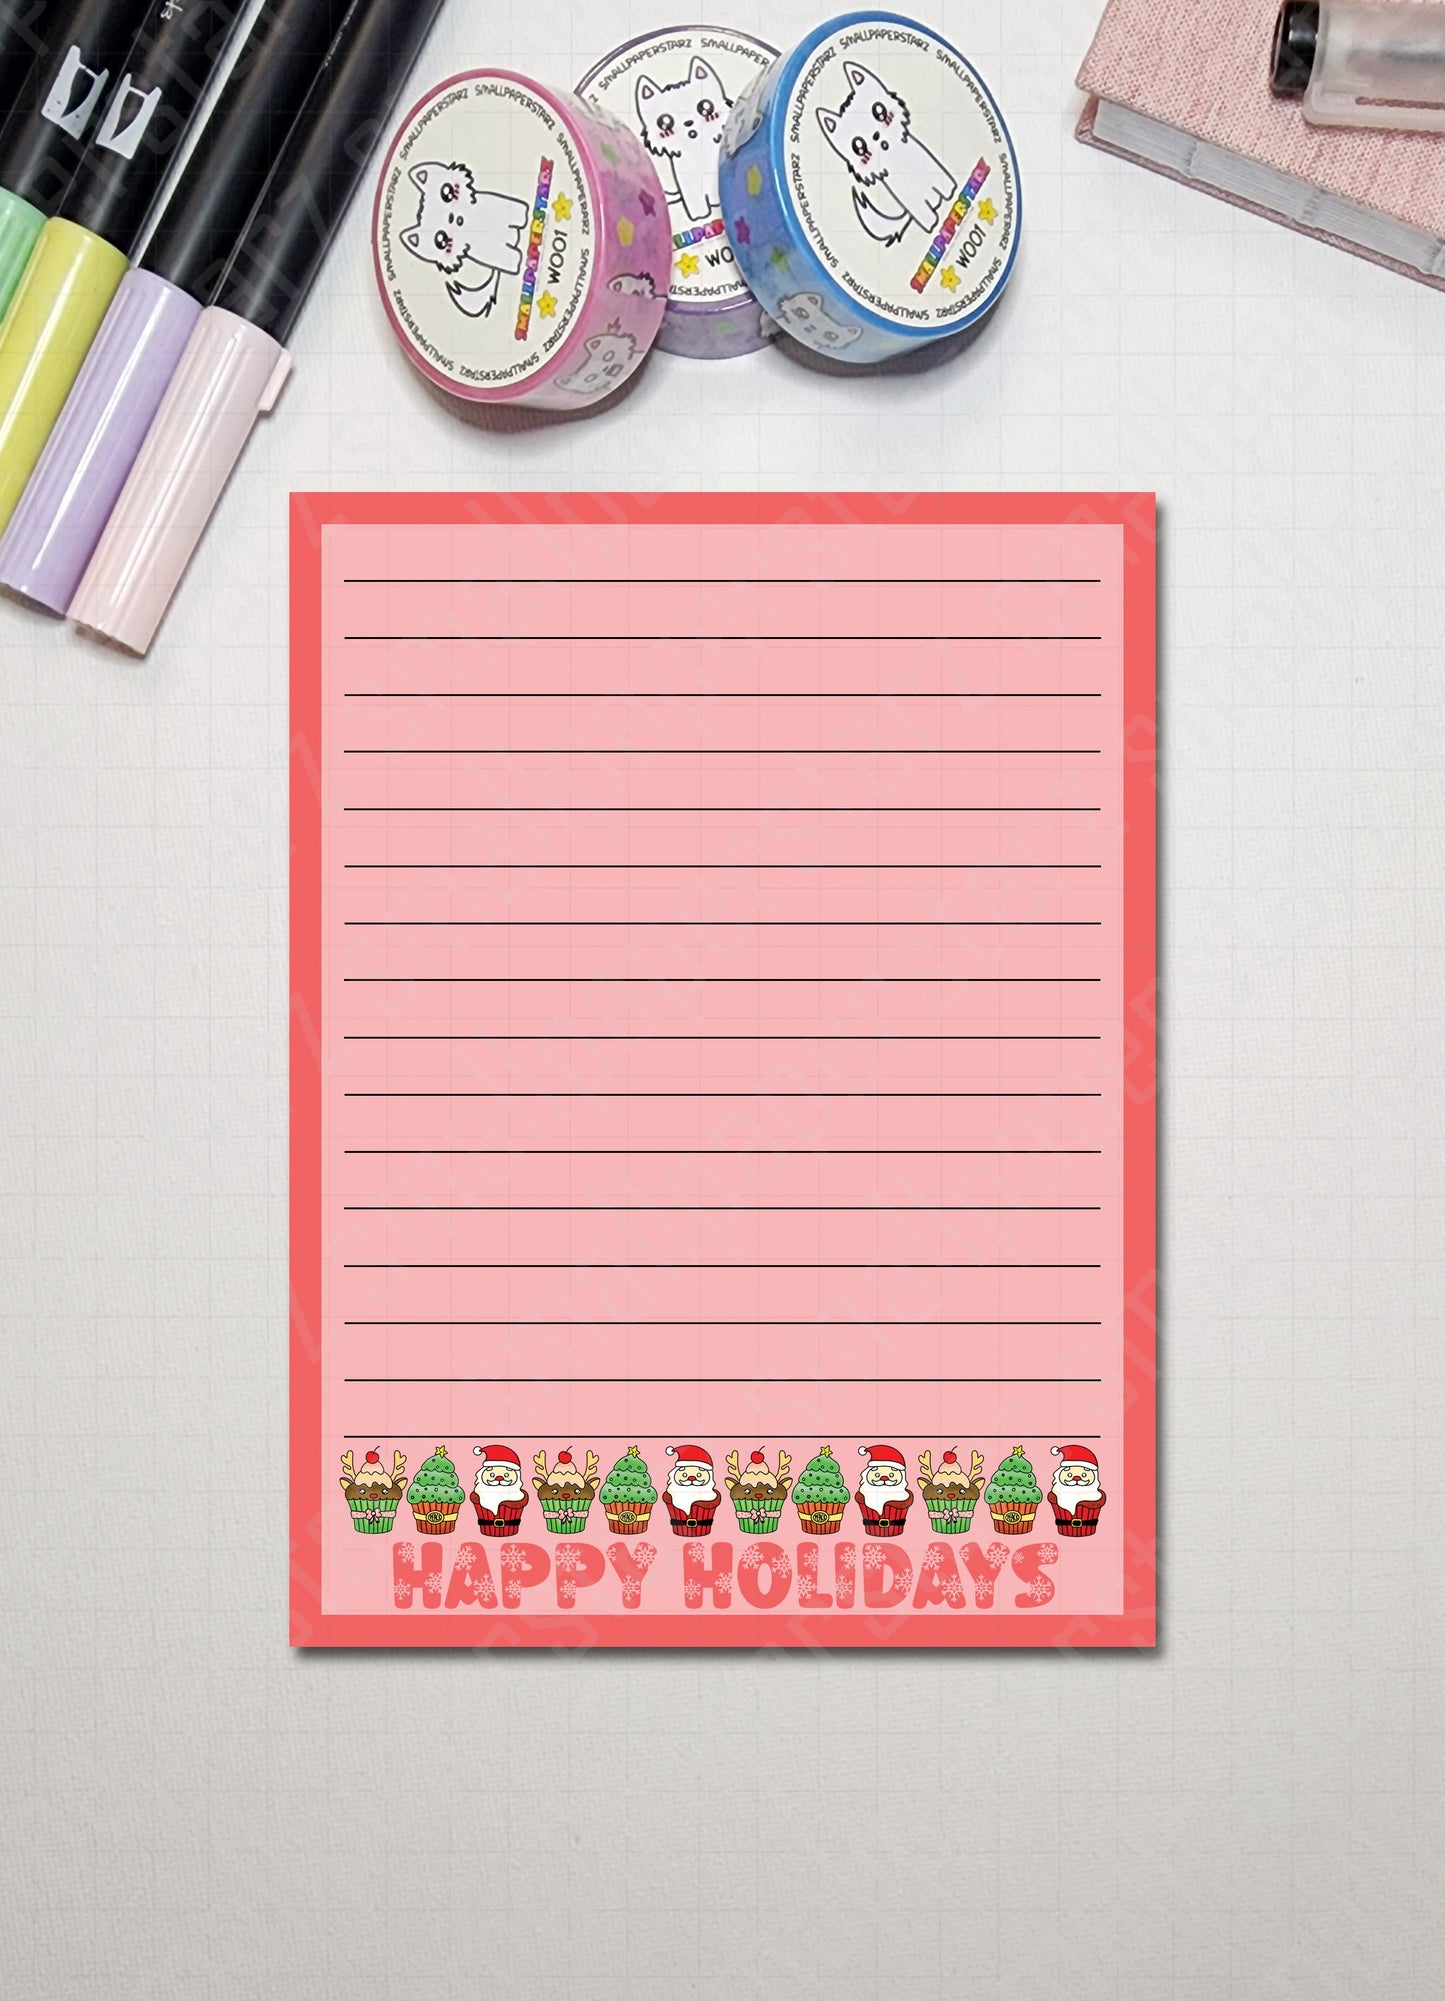 NP017 - Happy Holidays Cupcakes 4.5x6in Memo Notepads Multicoloured